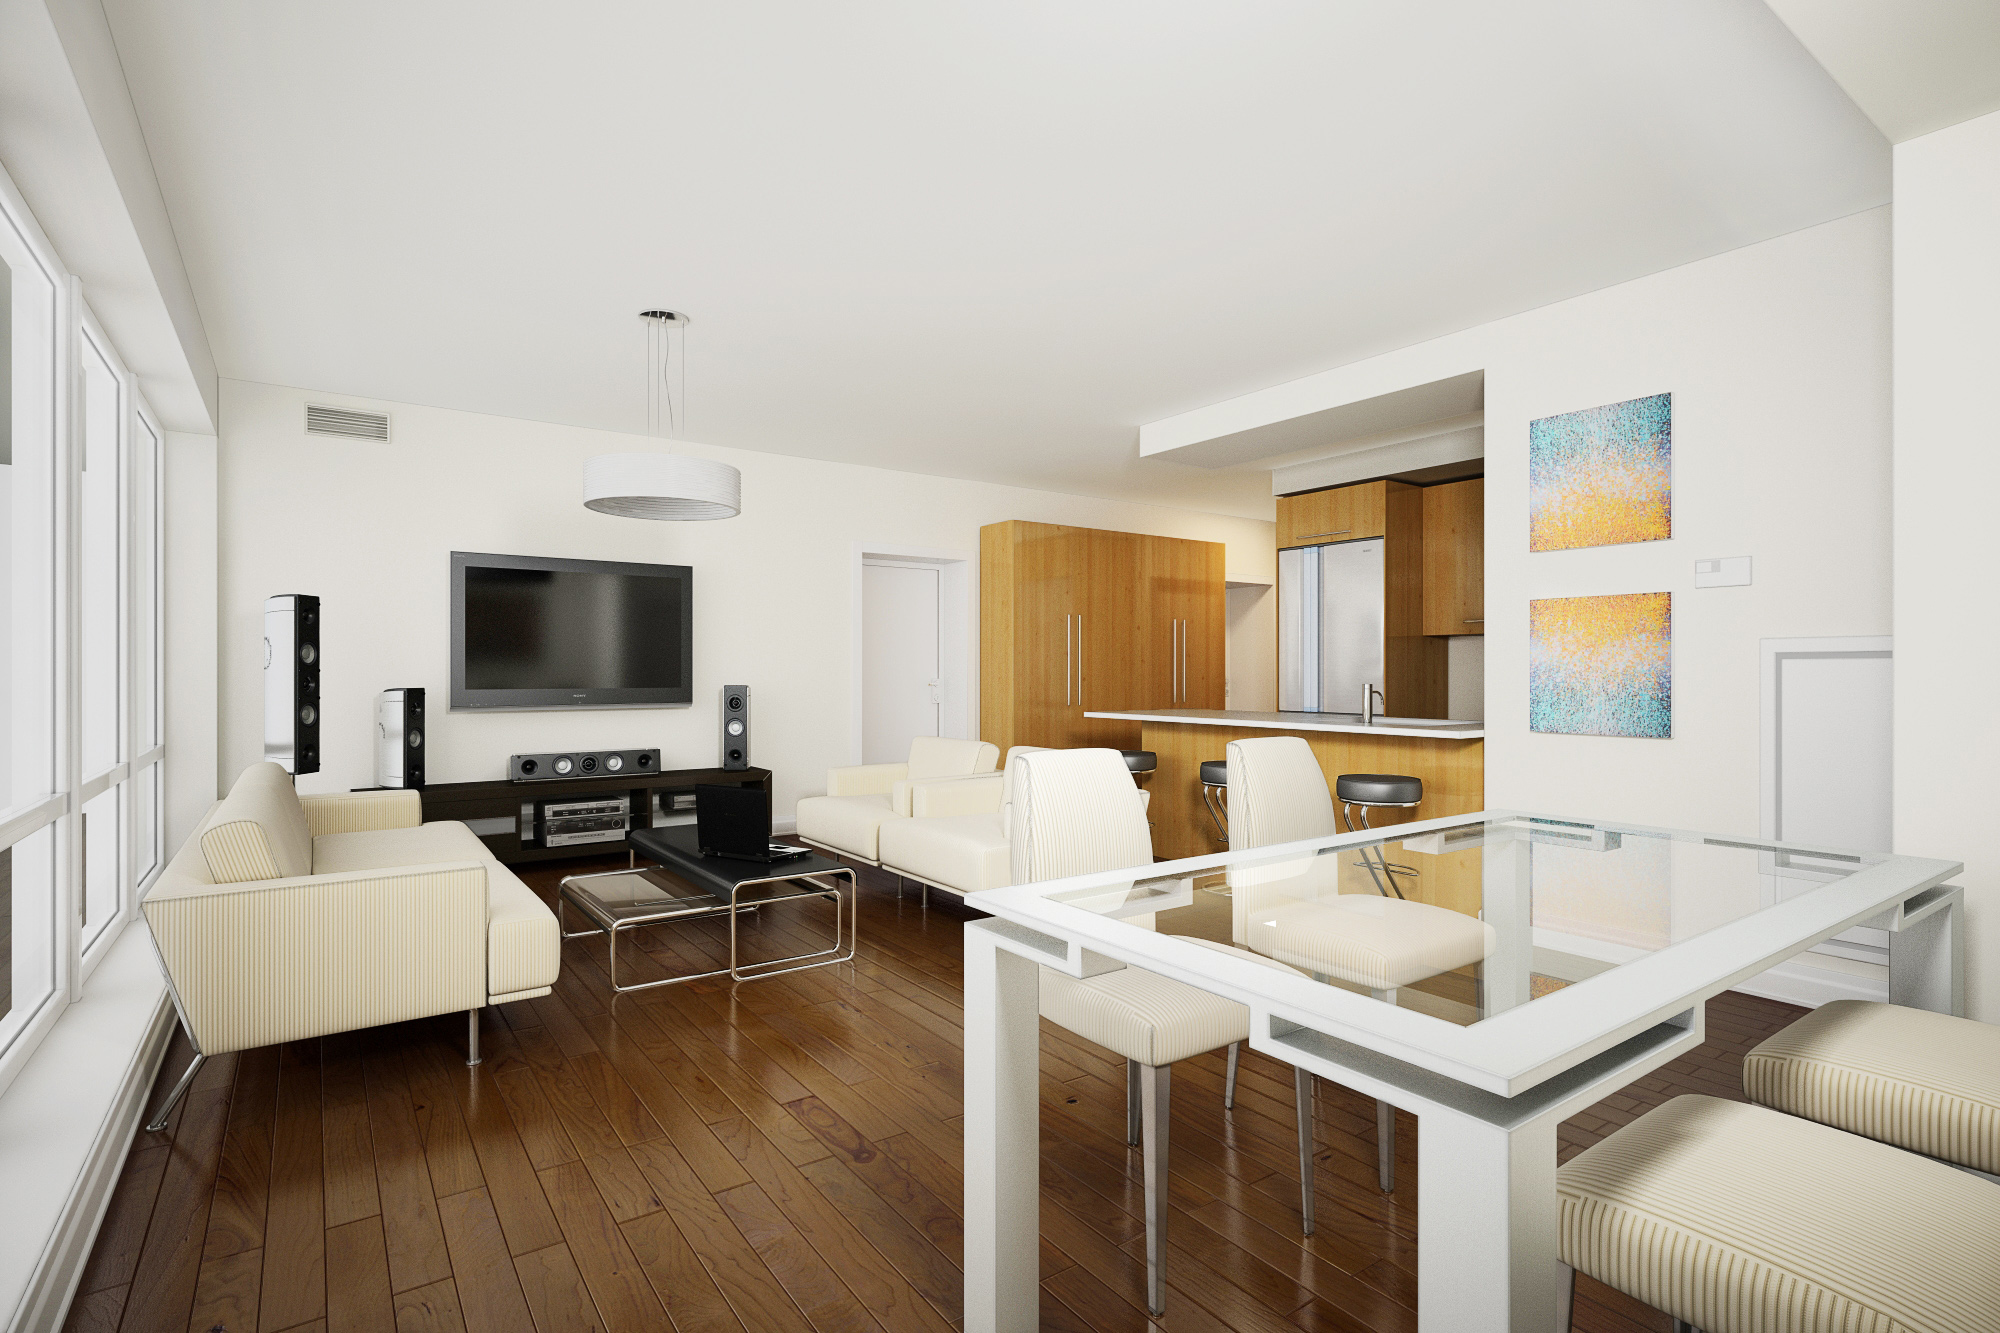 FESTIVAL TOWER CONDOS FOR SALE - TWO BEDROOM SUITES